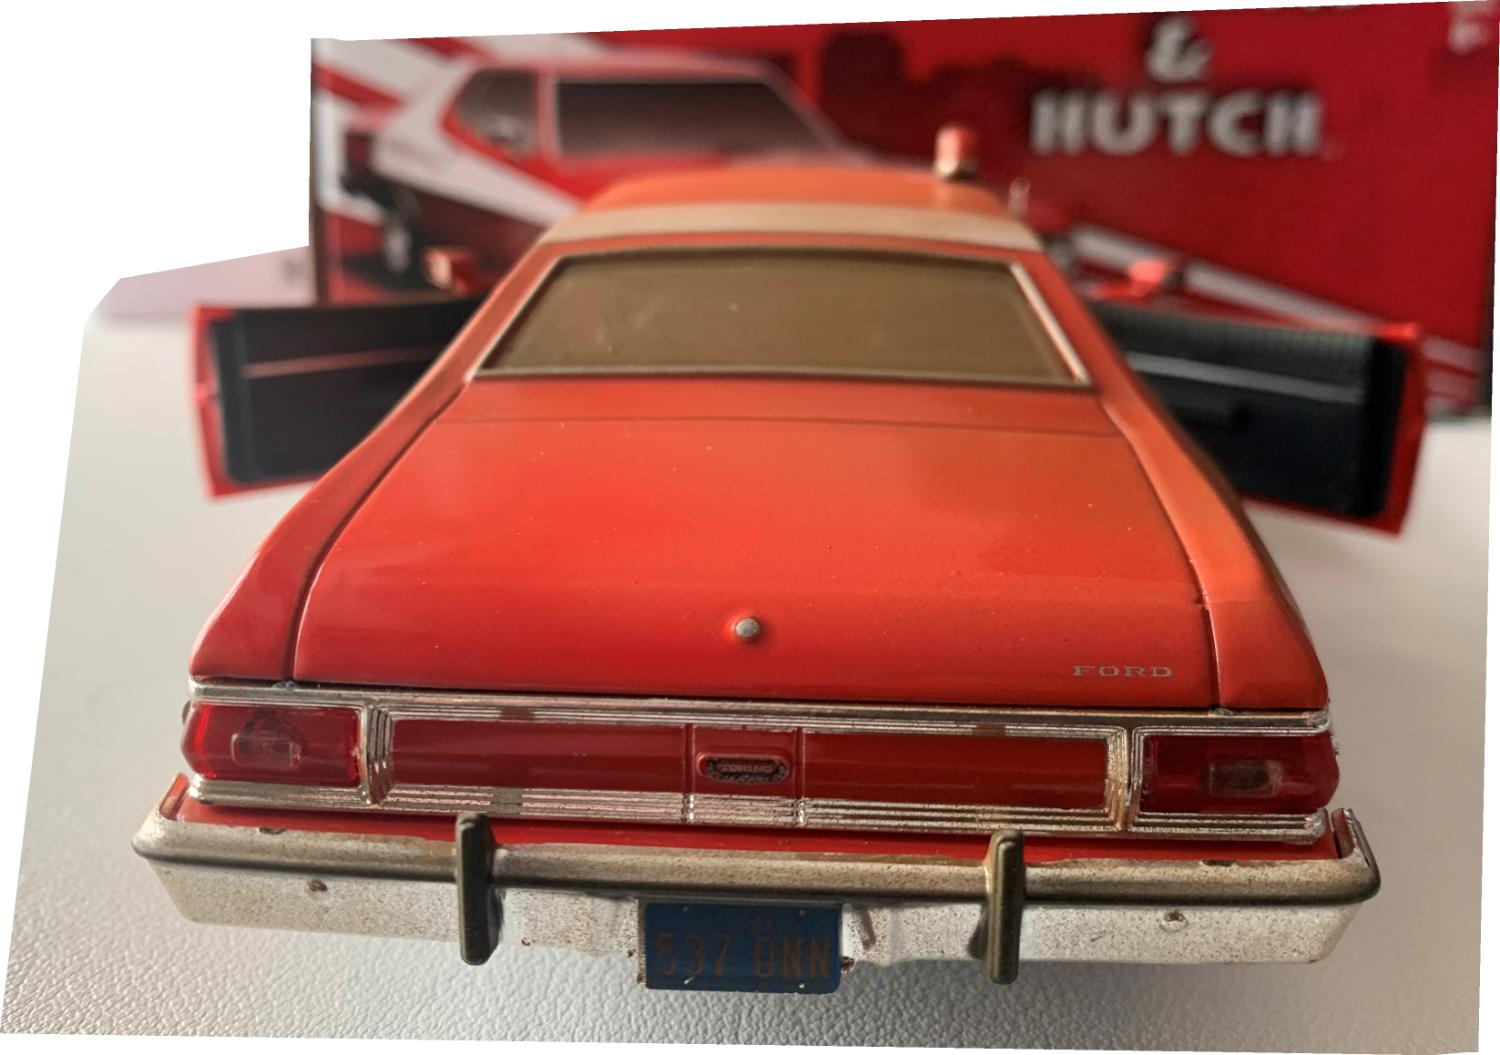 Starsky and Hutch Ford Gran Torino 1976 Weathered Version in red / white 1:24 scale model from Greenlight, limited edition model